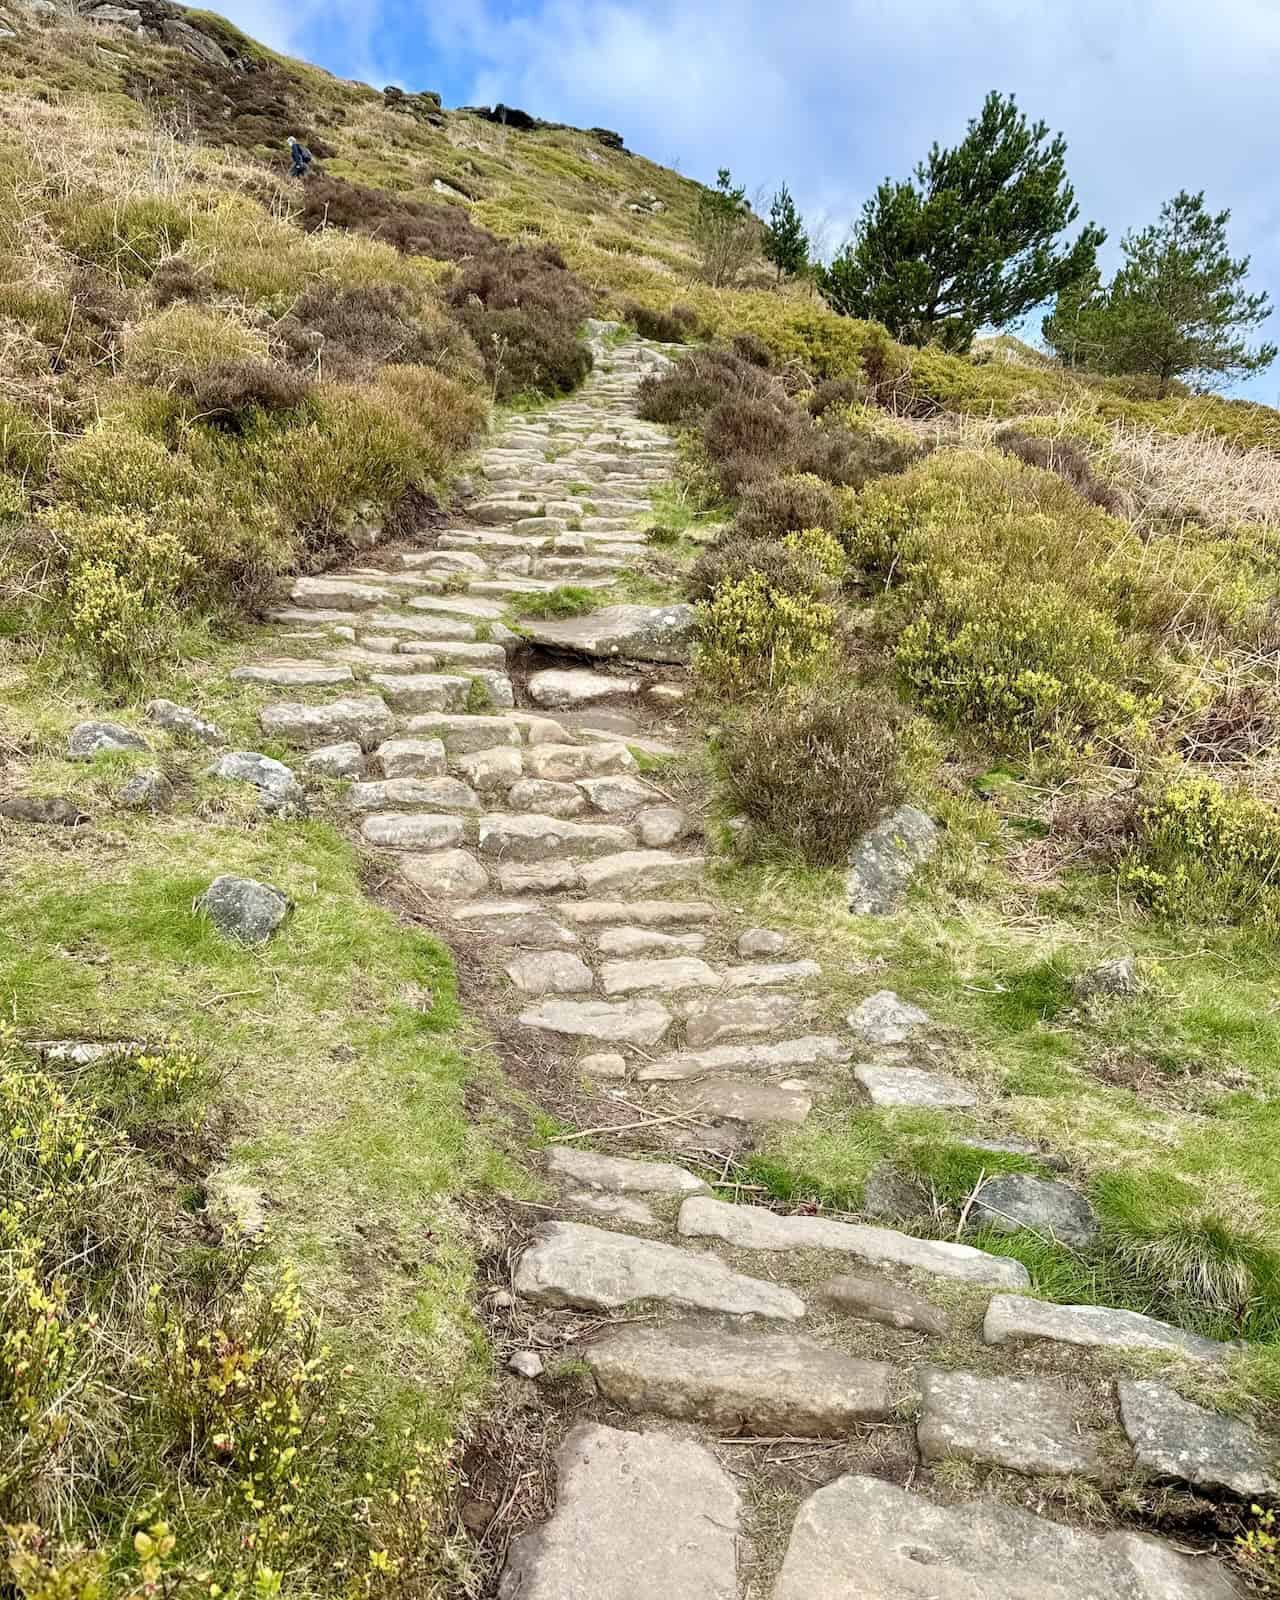 The stone steps of the Cleveland Way lead steeply west uphill towards the summit of White Hill, encountered shortly after beginning our Lordstones walk.